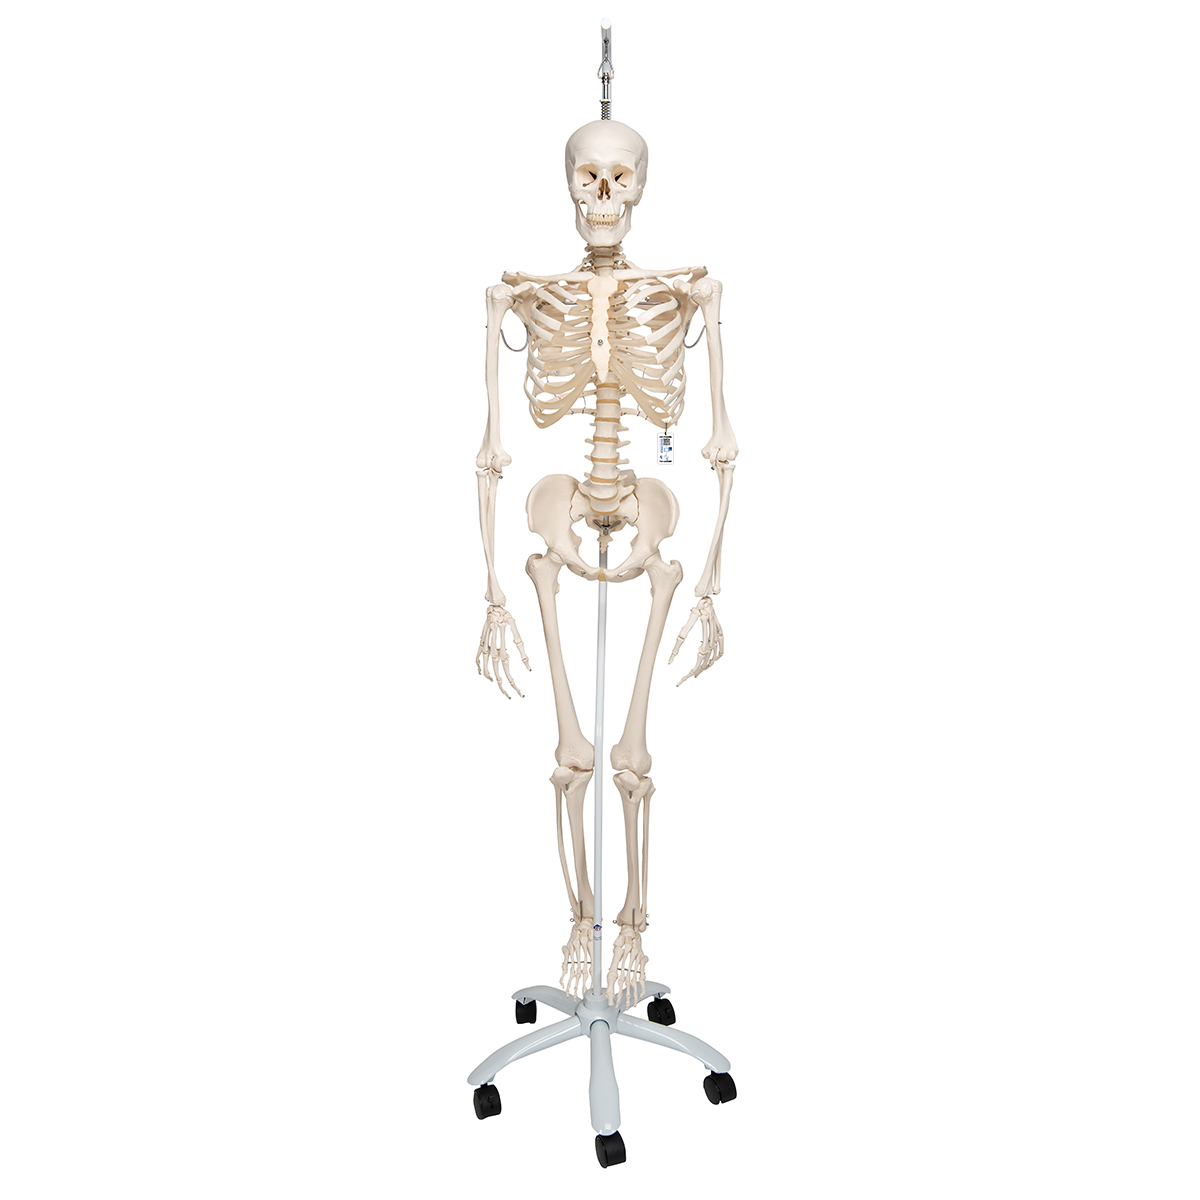 Physiological Human Skeleton Model Phil on Hanging Stand - 3B Smart Anatomy